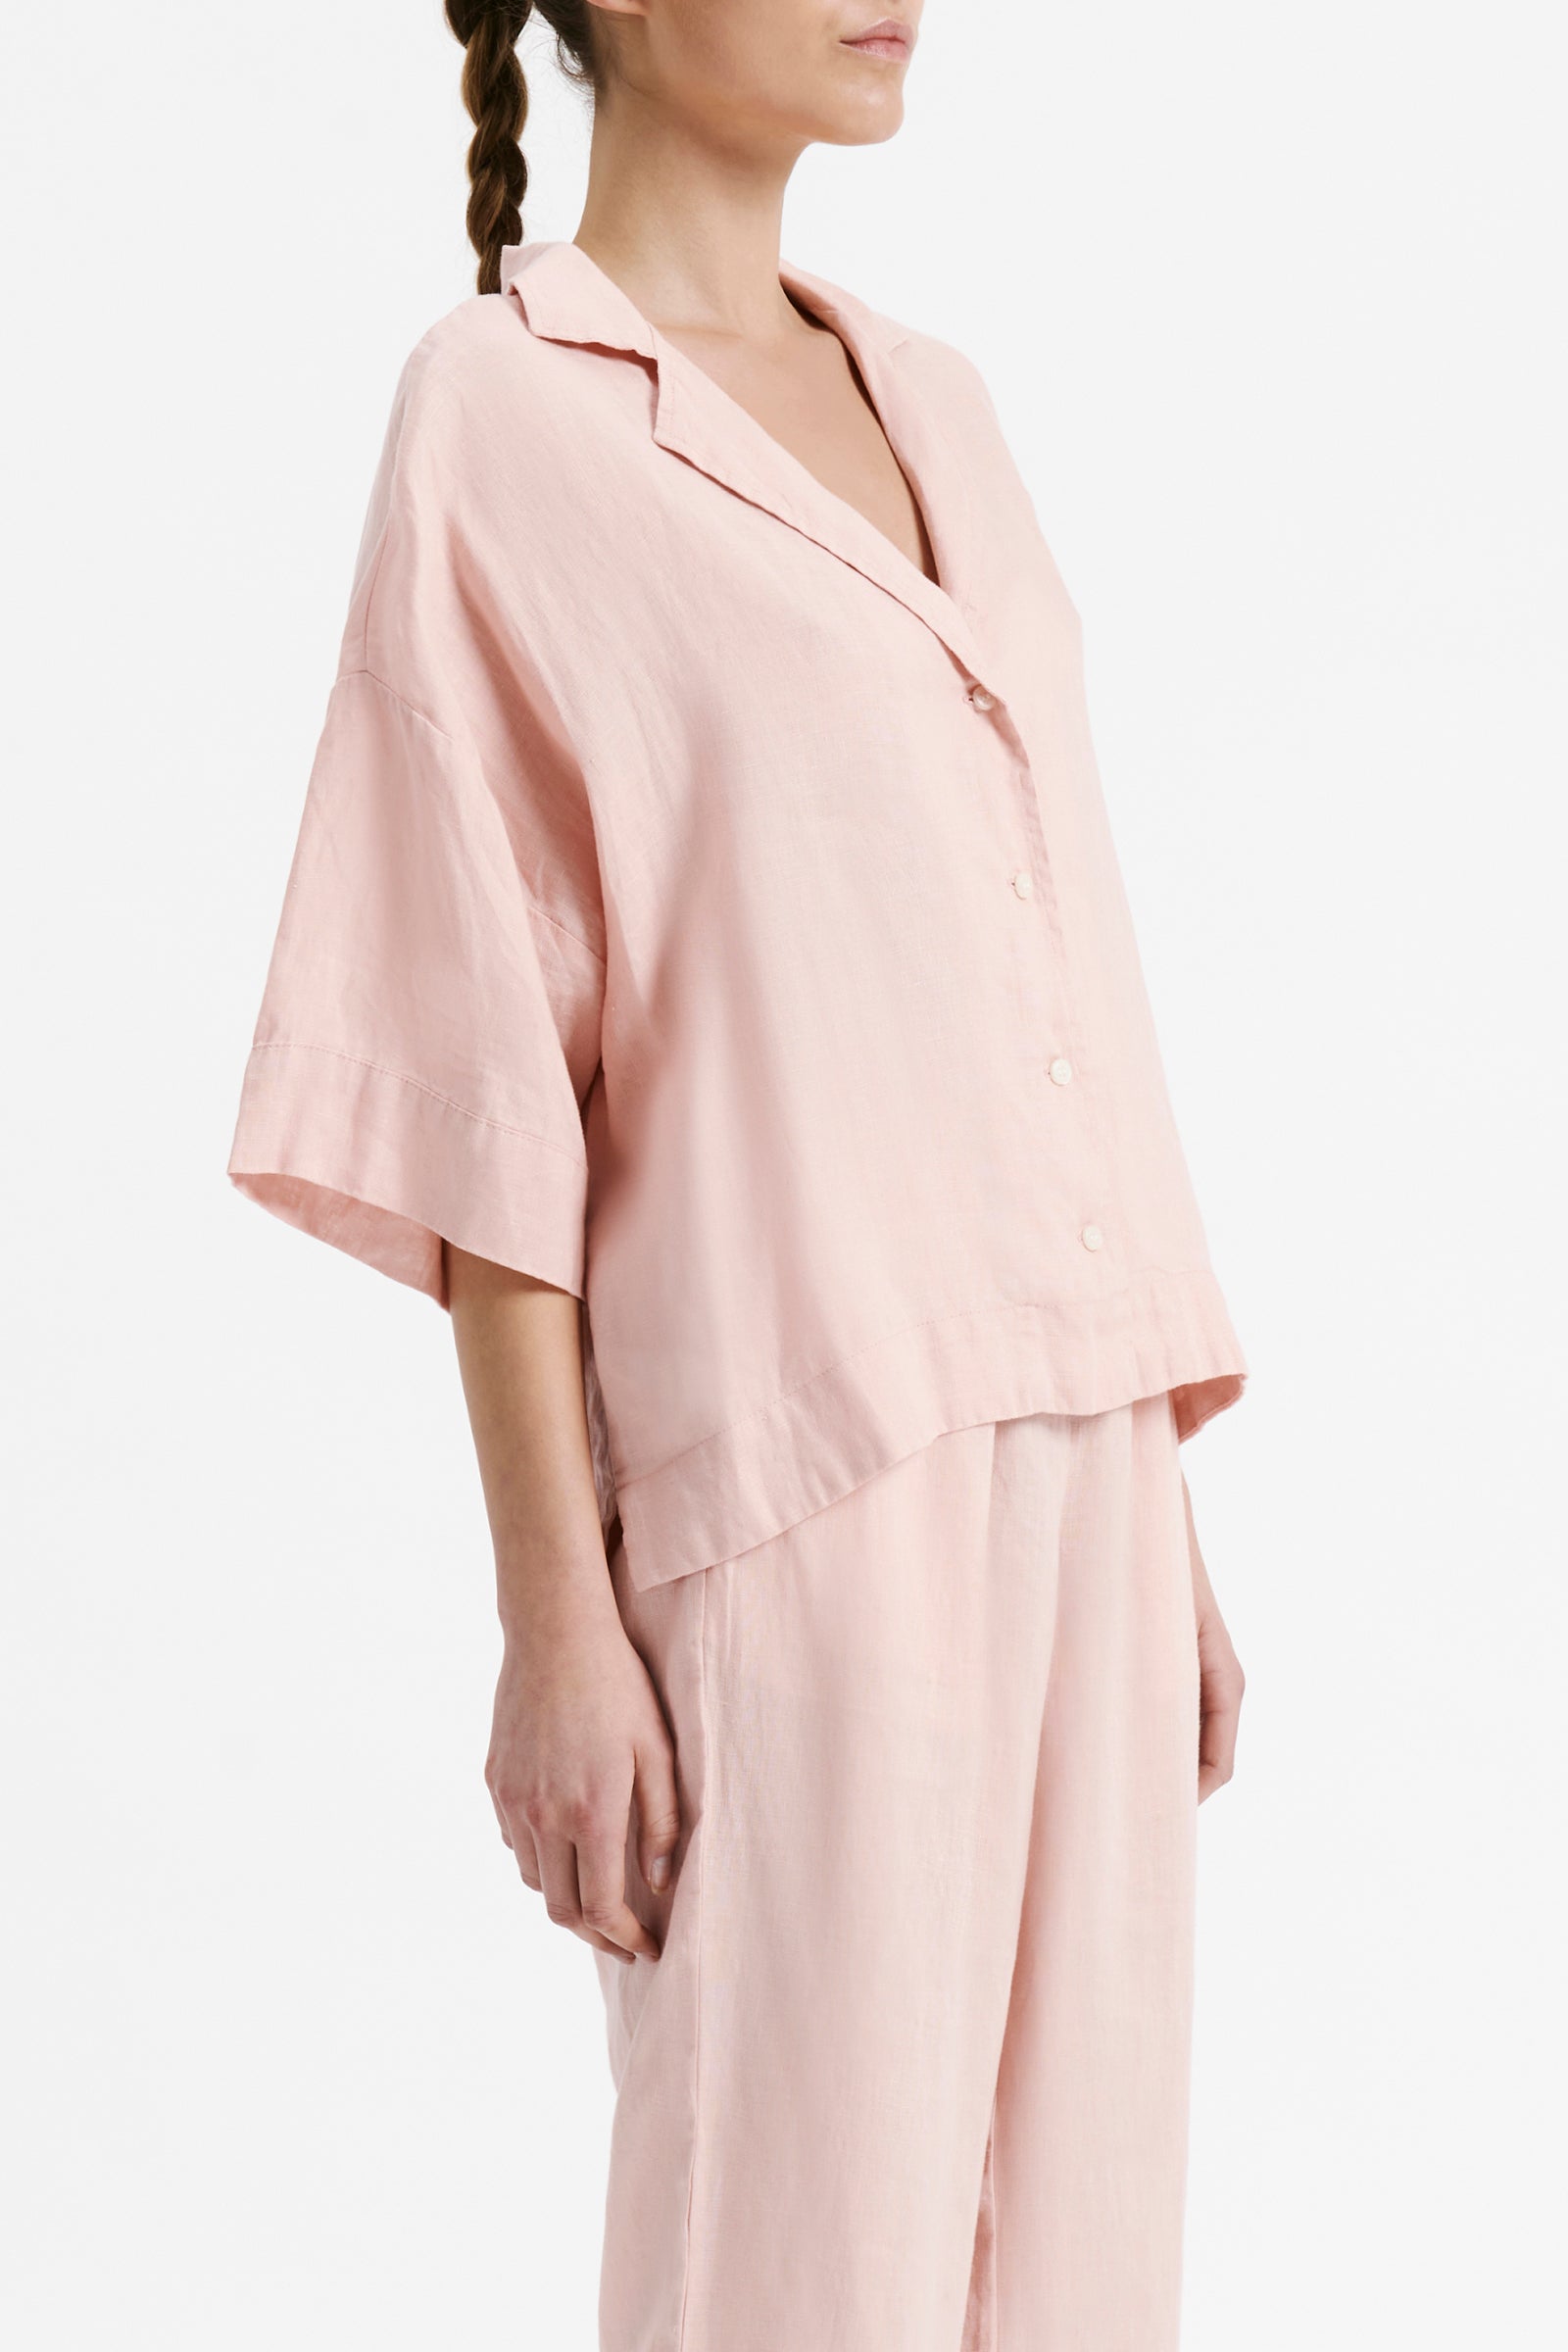 Nude Lucy Lounge Linen Shirt In A Light Pink Guava Colour 